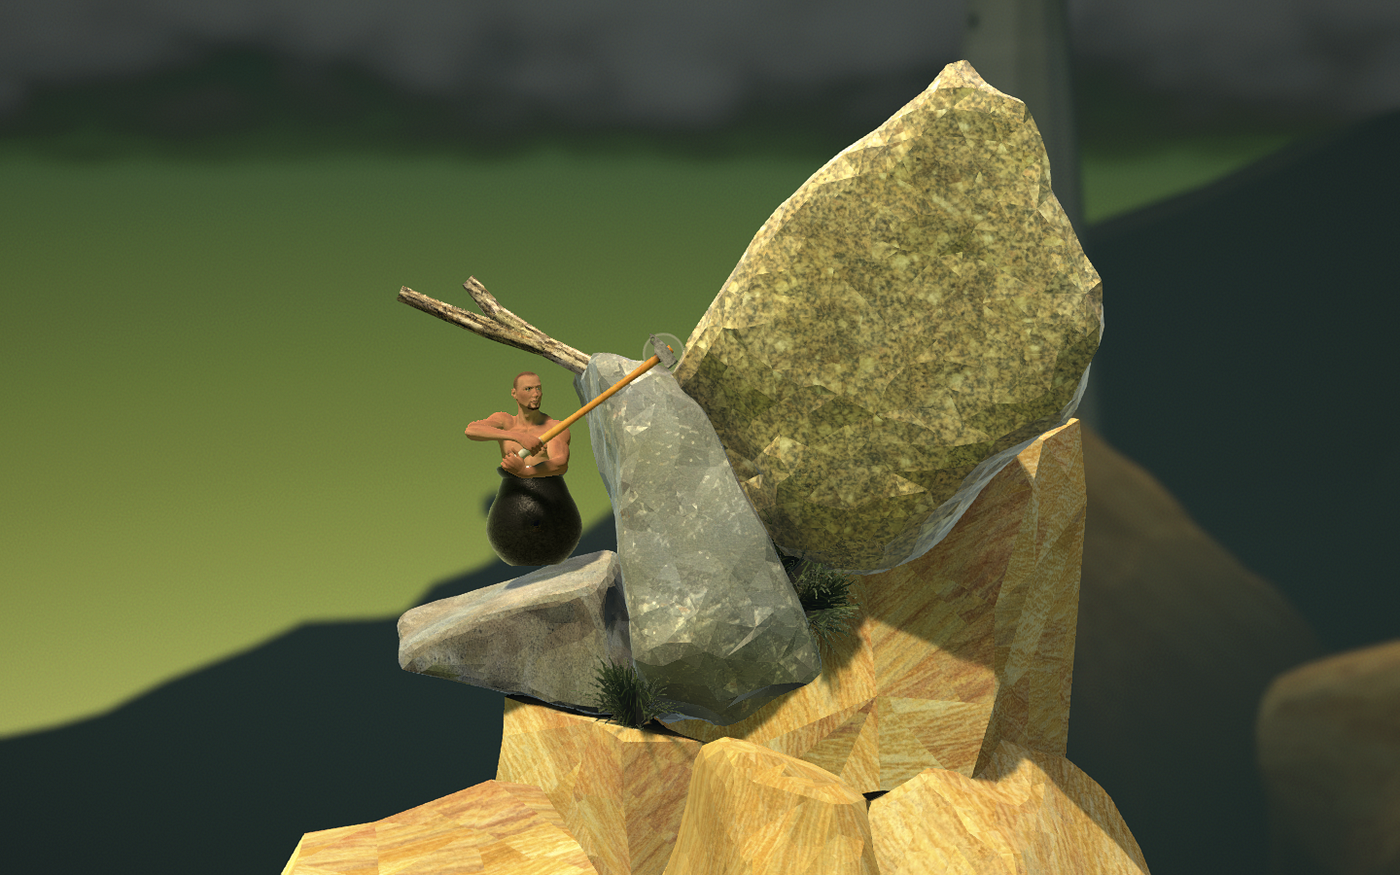 Find out the true meaning of frustration in the utterly pitiless Getting Over  It with Bennett Foddy, by Andy Humphreys